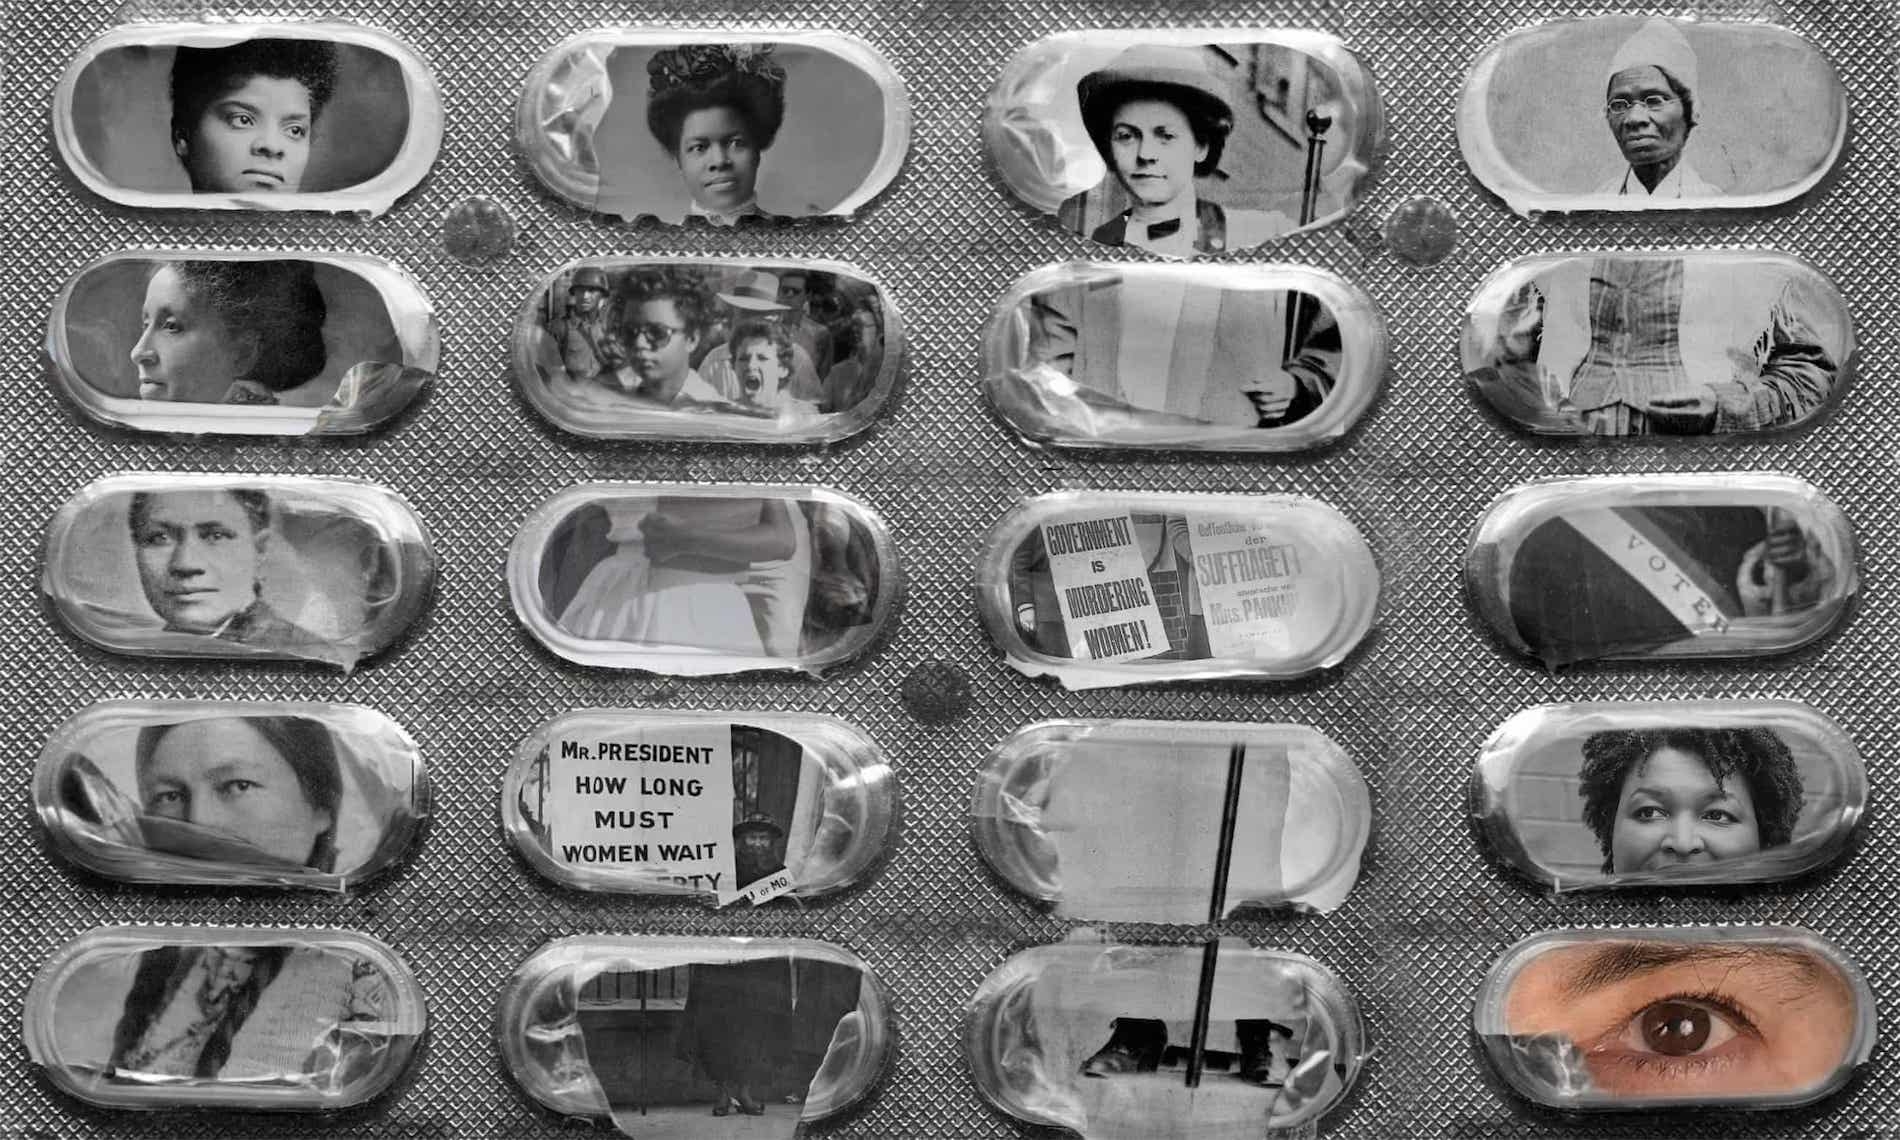 a close up of old photographs of the suffrage movement peeking through used capsules on a birth control pill holder